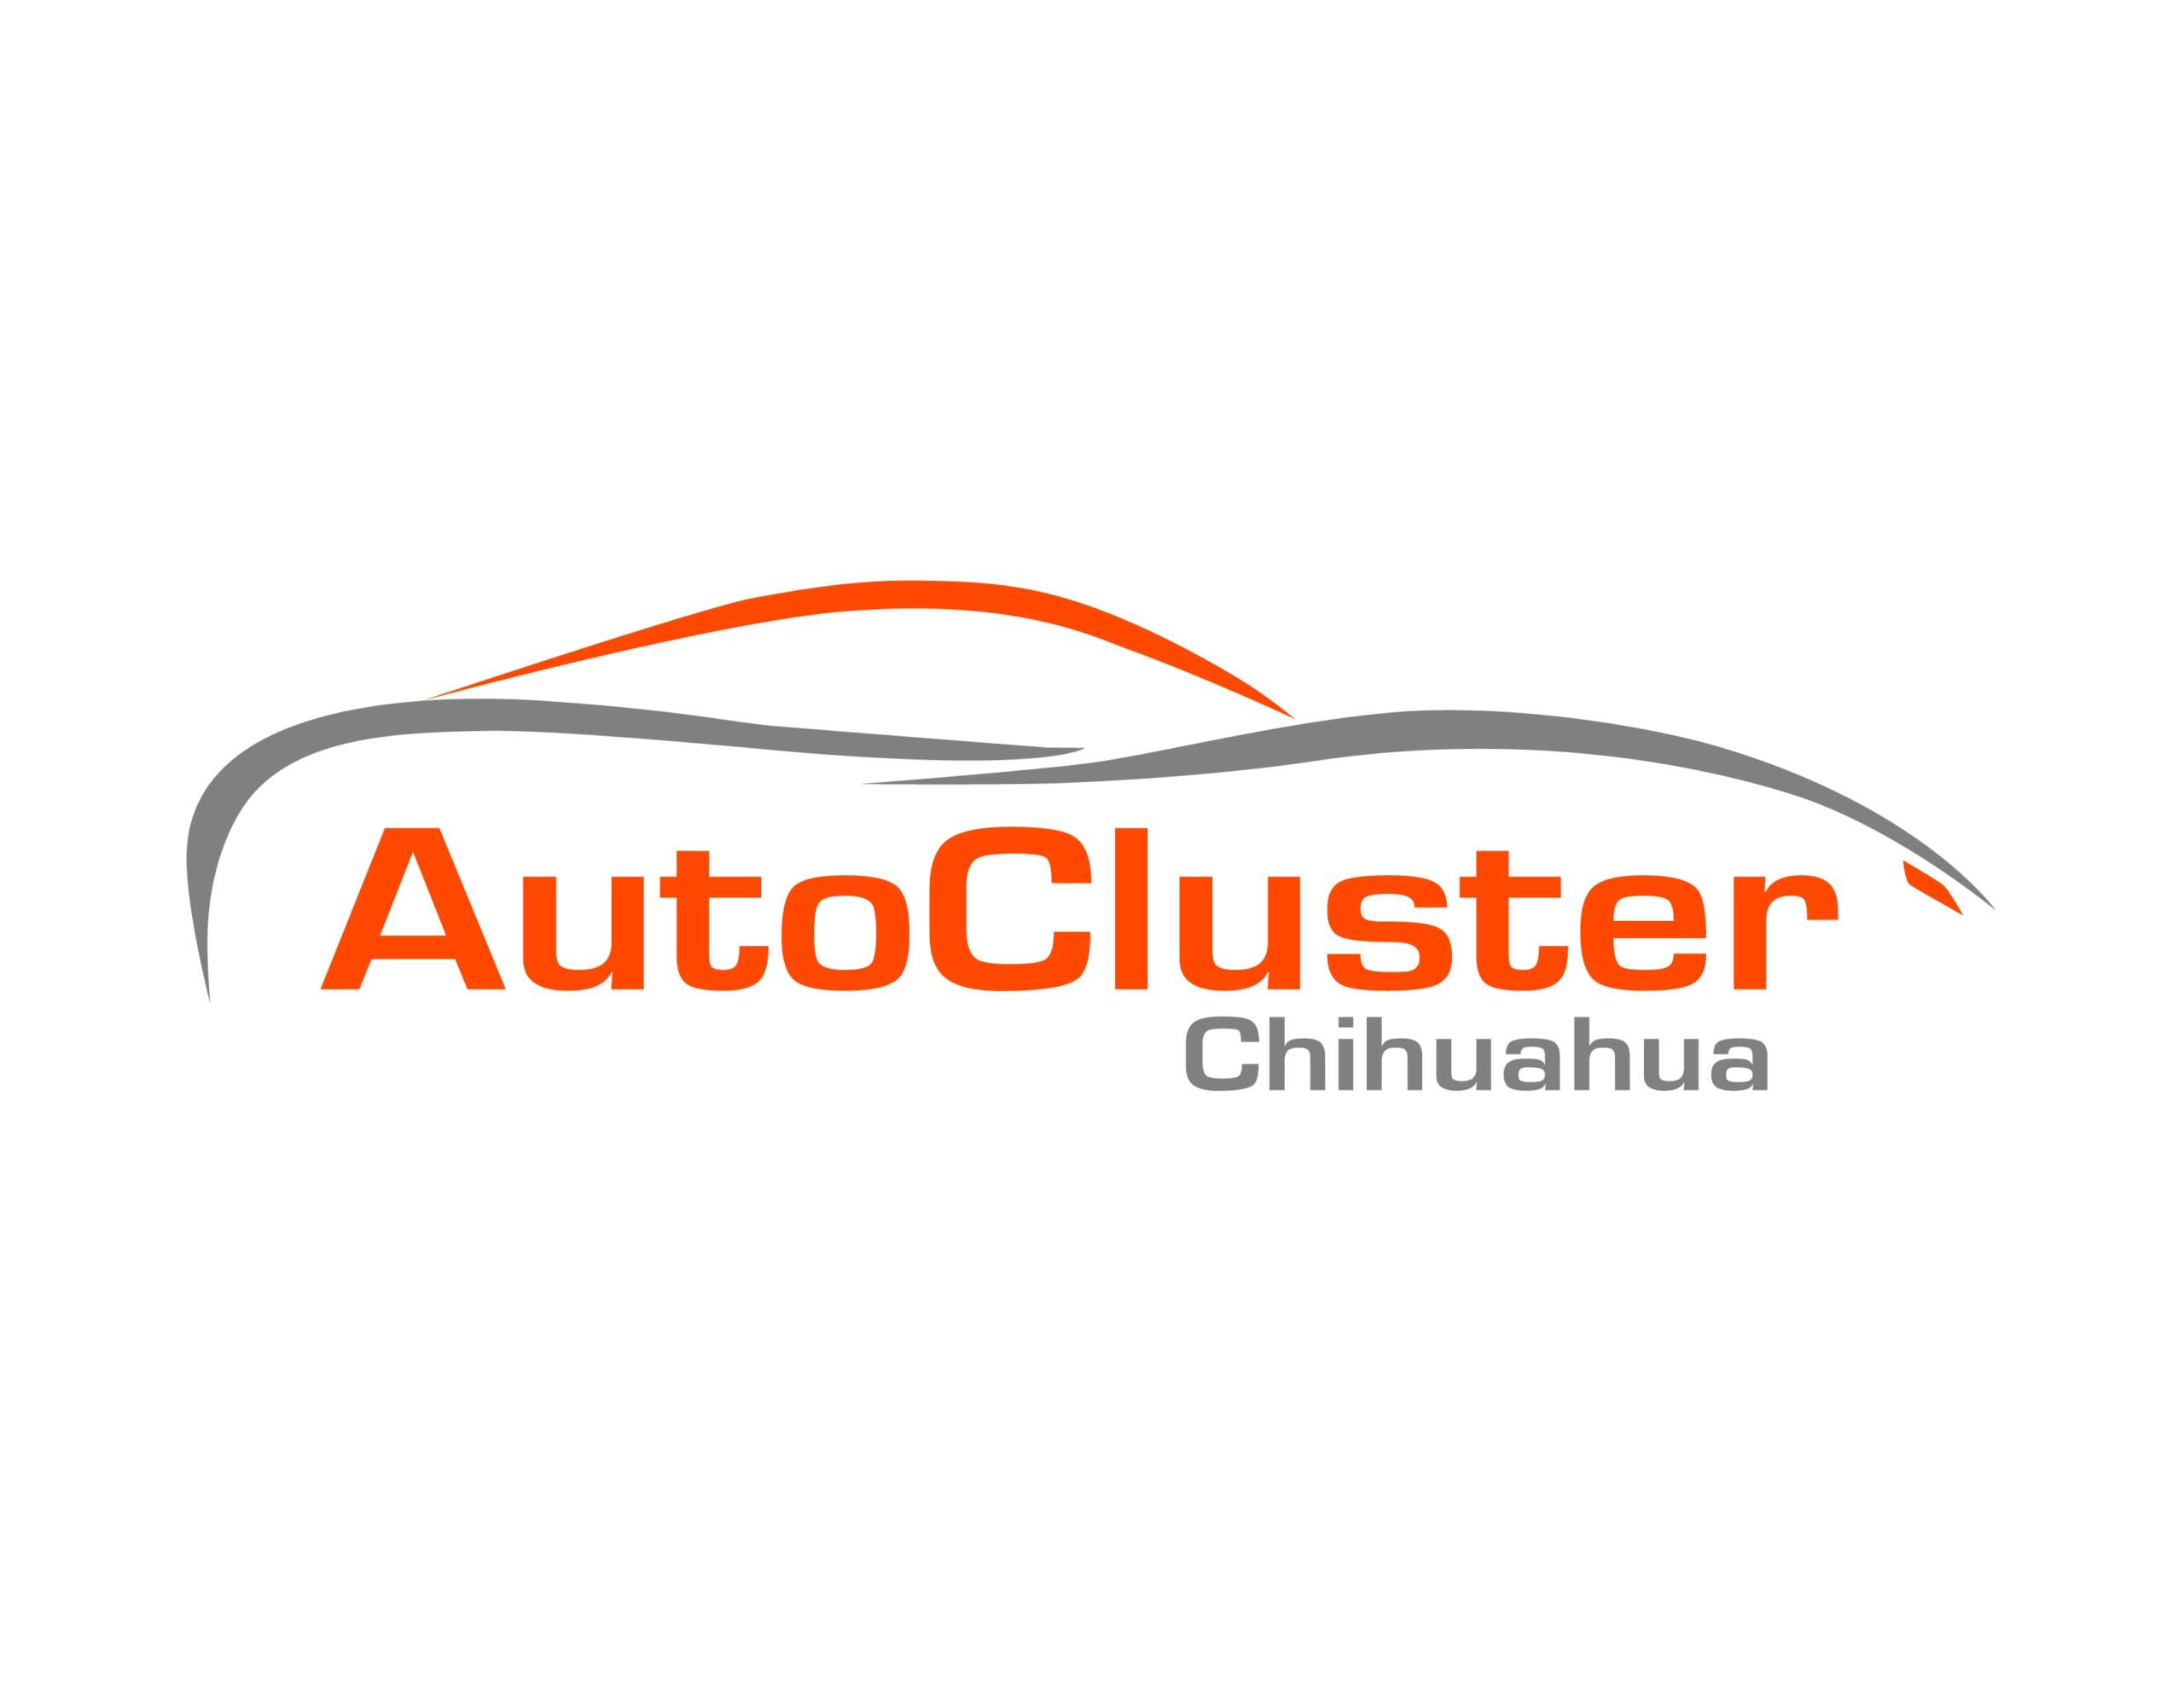 Chihuahua Automotive Cluster Expands